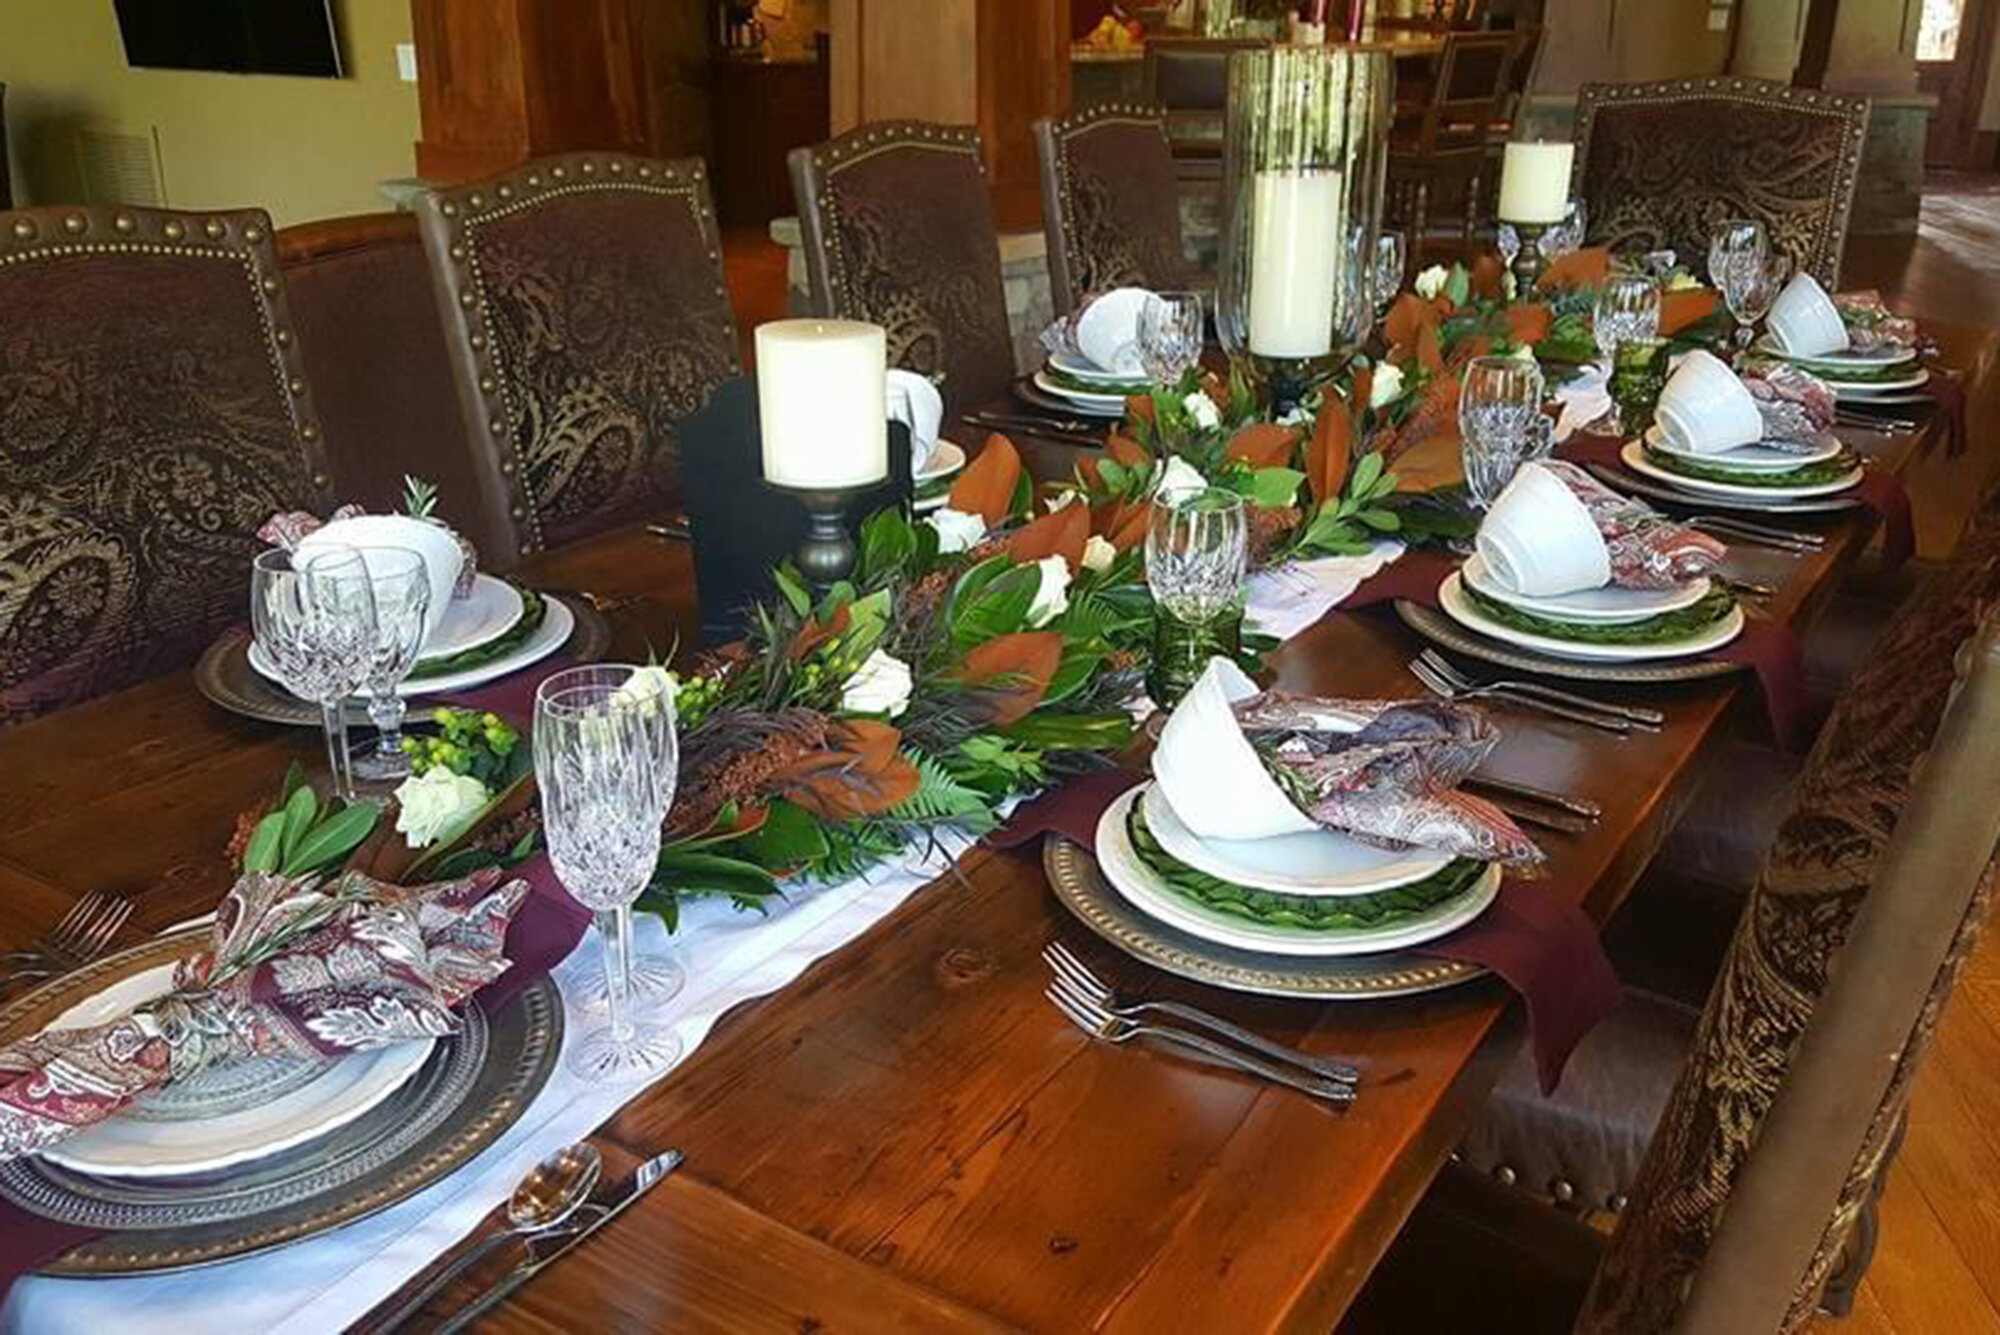 Event Table Design by Petula Design.jpg